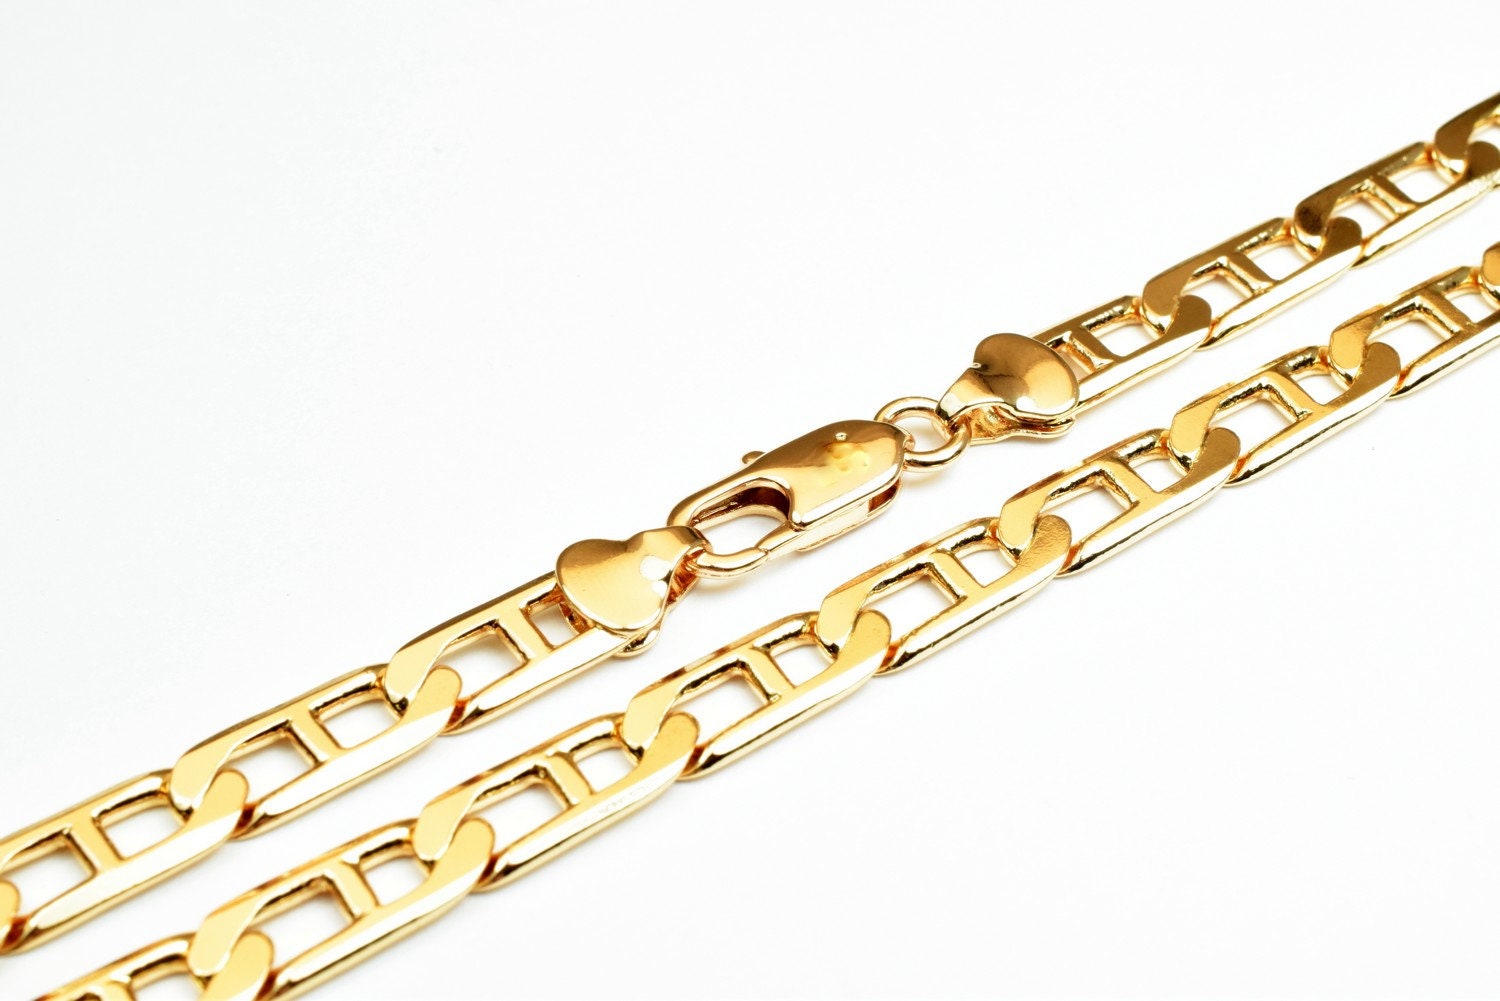 18K gold filled EP tarnish resistant Anchor Chain Size 23" Inches, Width 7mm, Thickness 1.5mm For Jewelry Making CG439